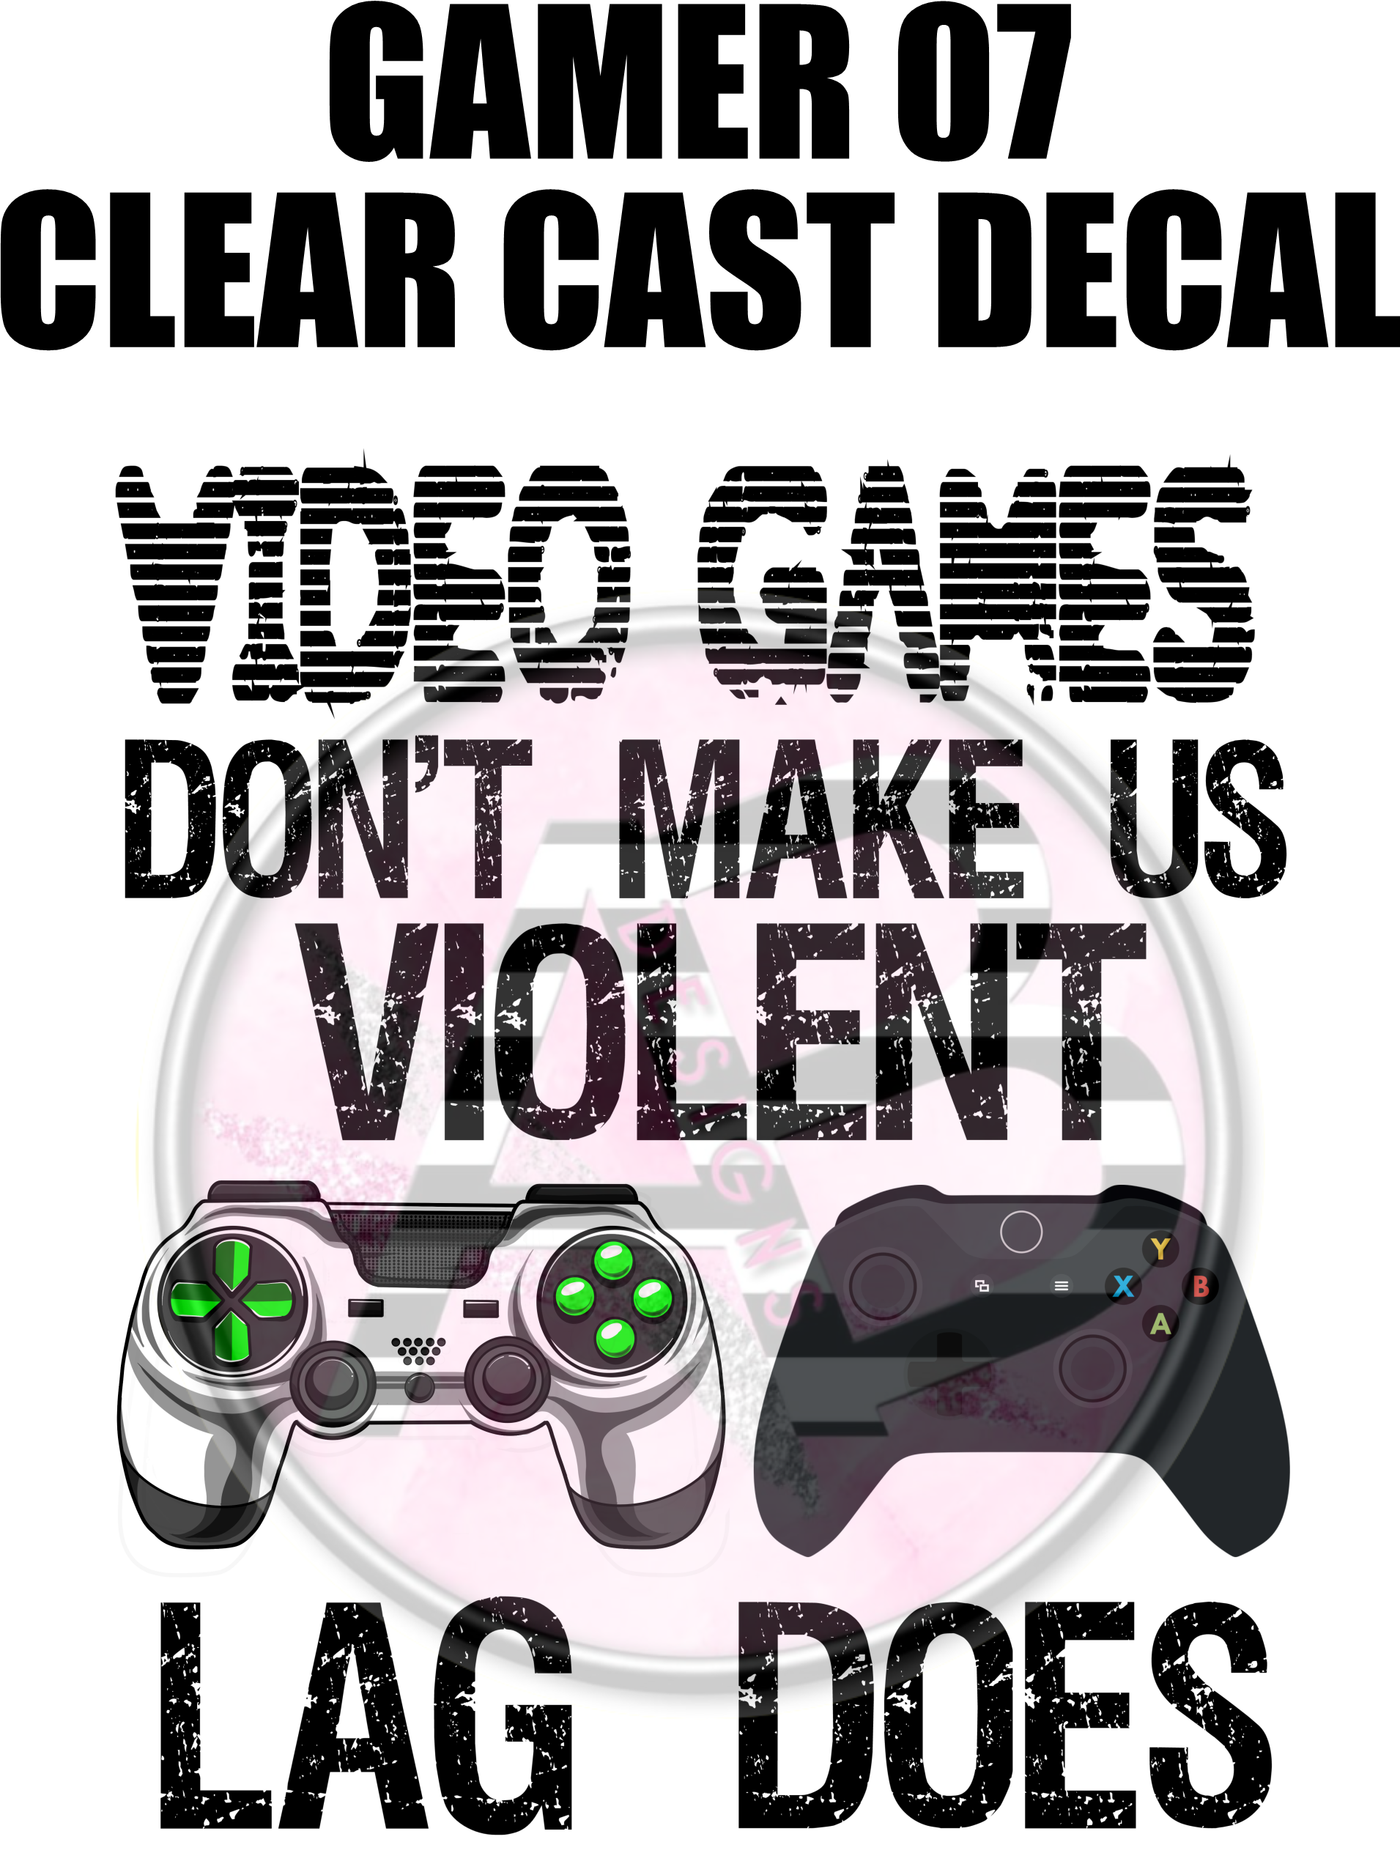 Gamer 07 - Clear Cast Decal